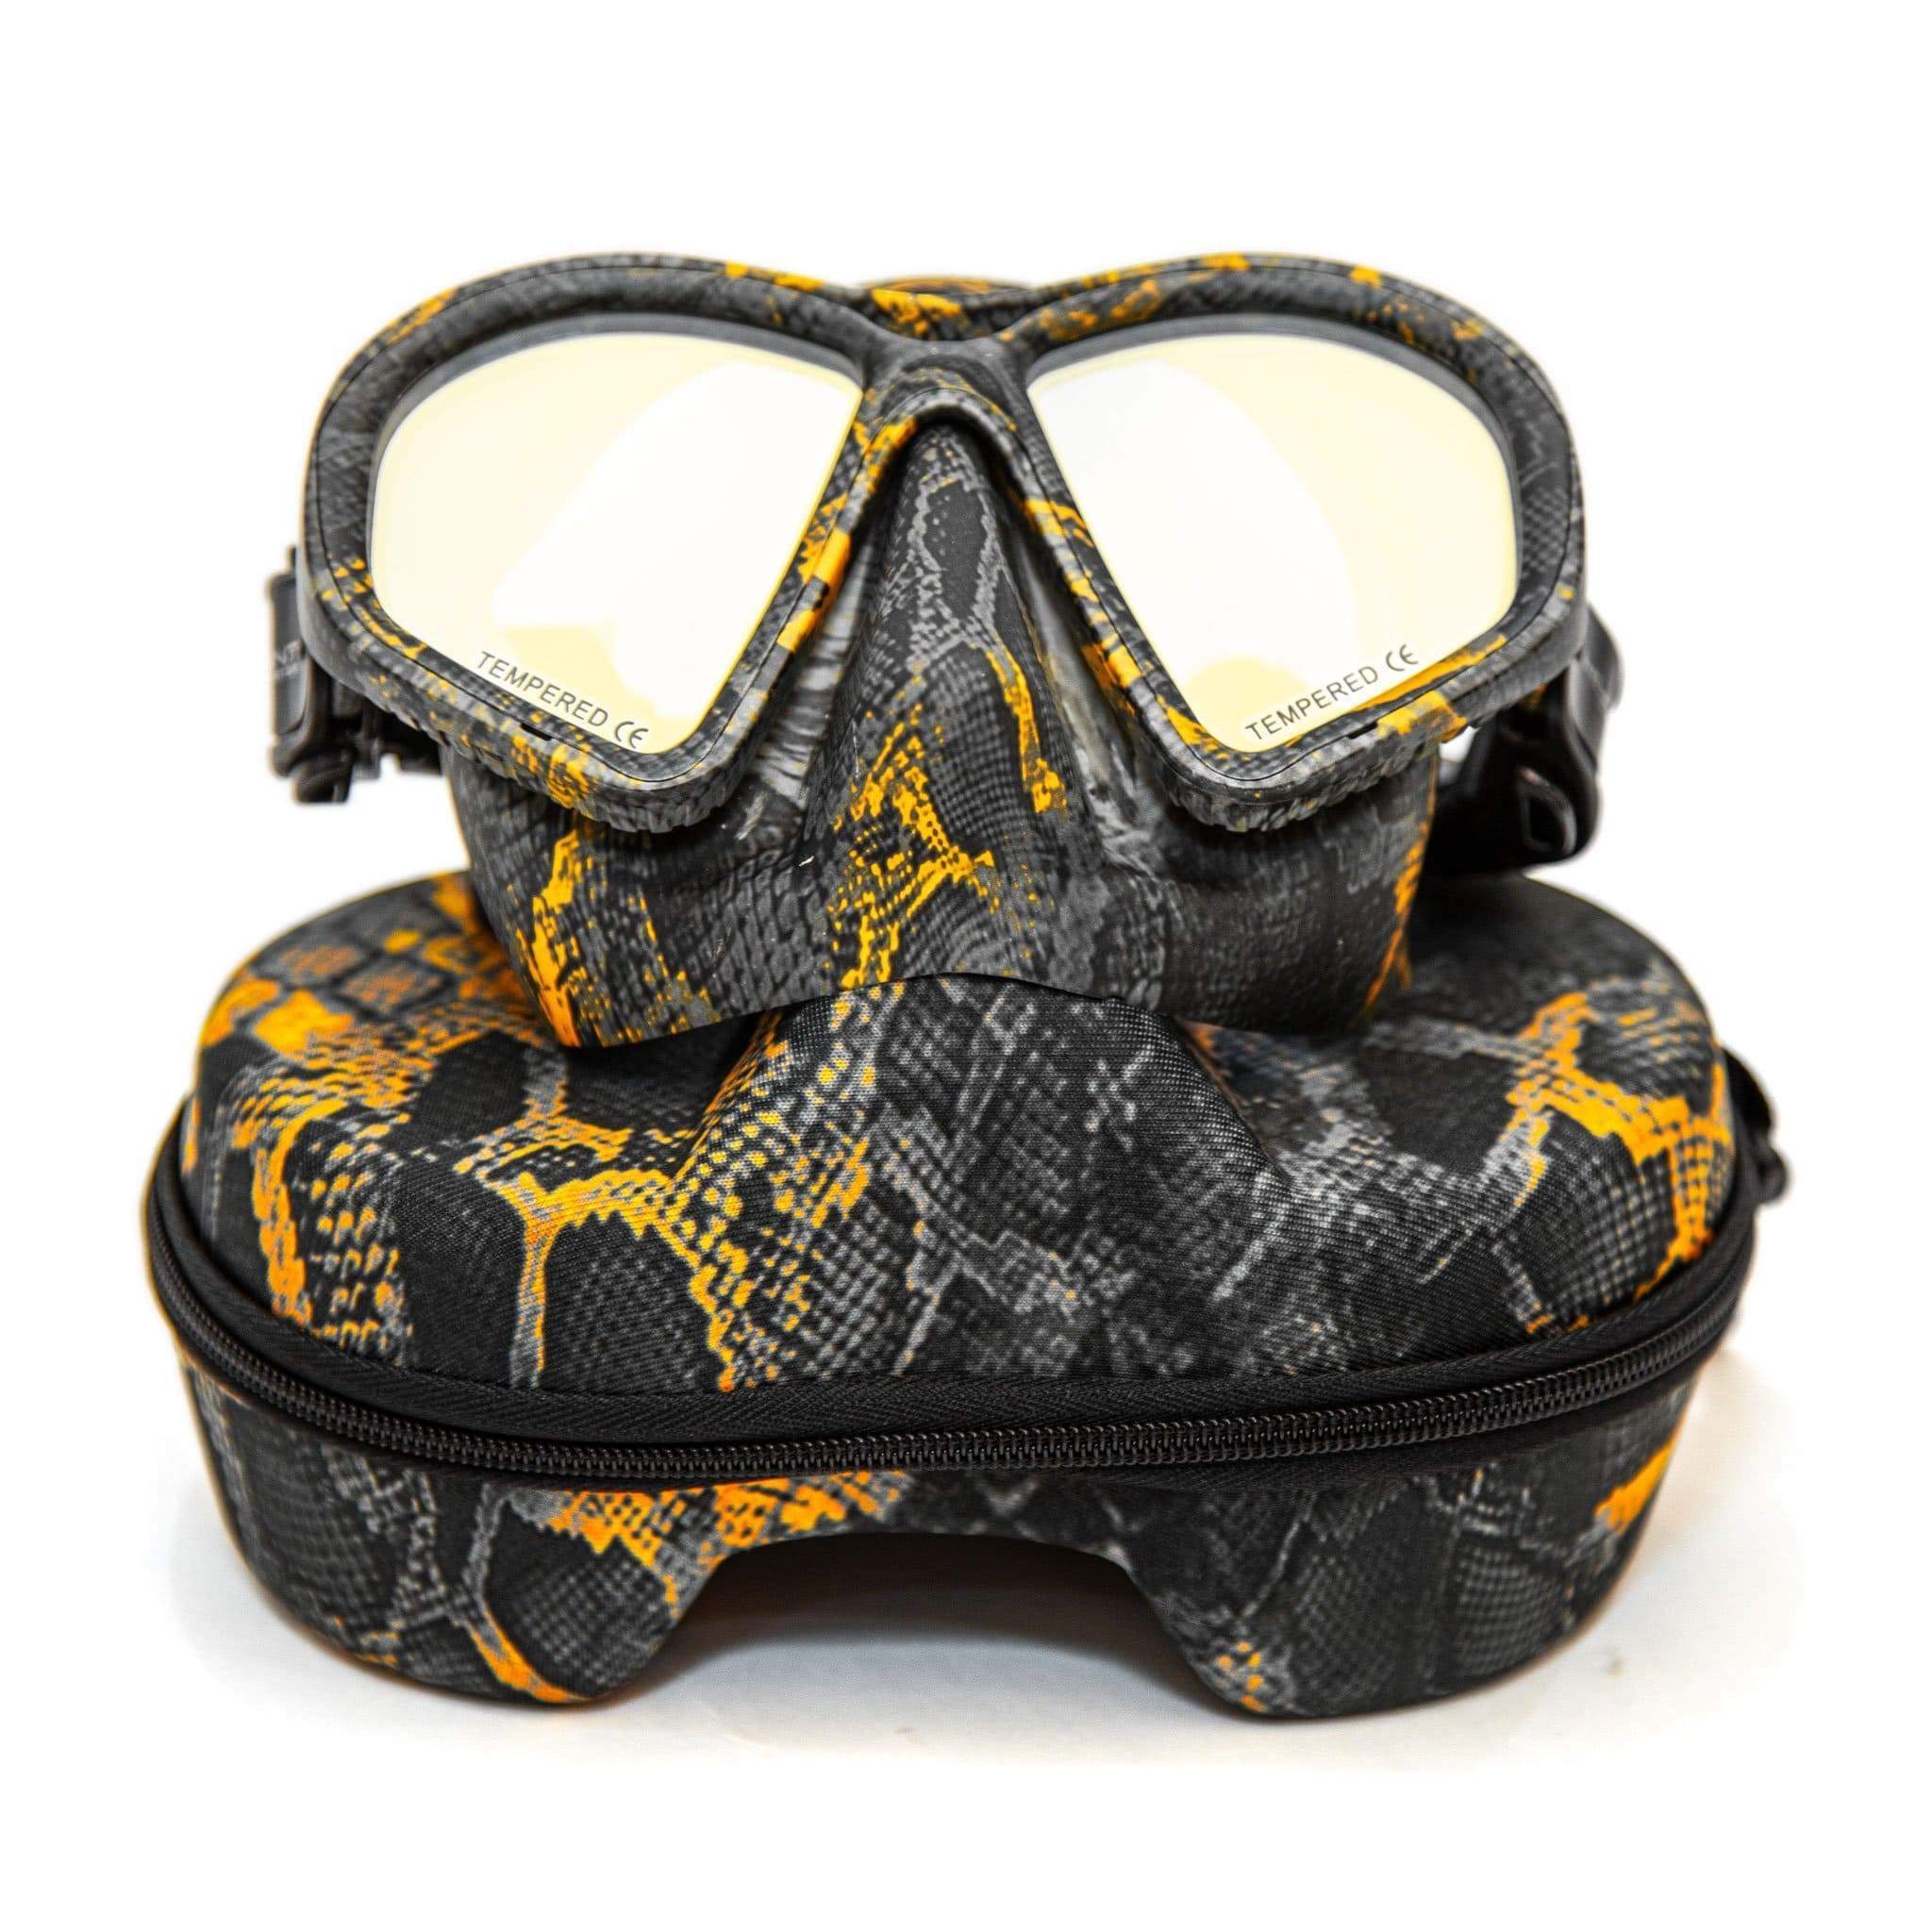 HuntMaster Blaze Harbinger Camo Diving Mask - With Matching Camo Container (Blaze)